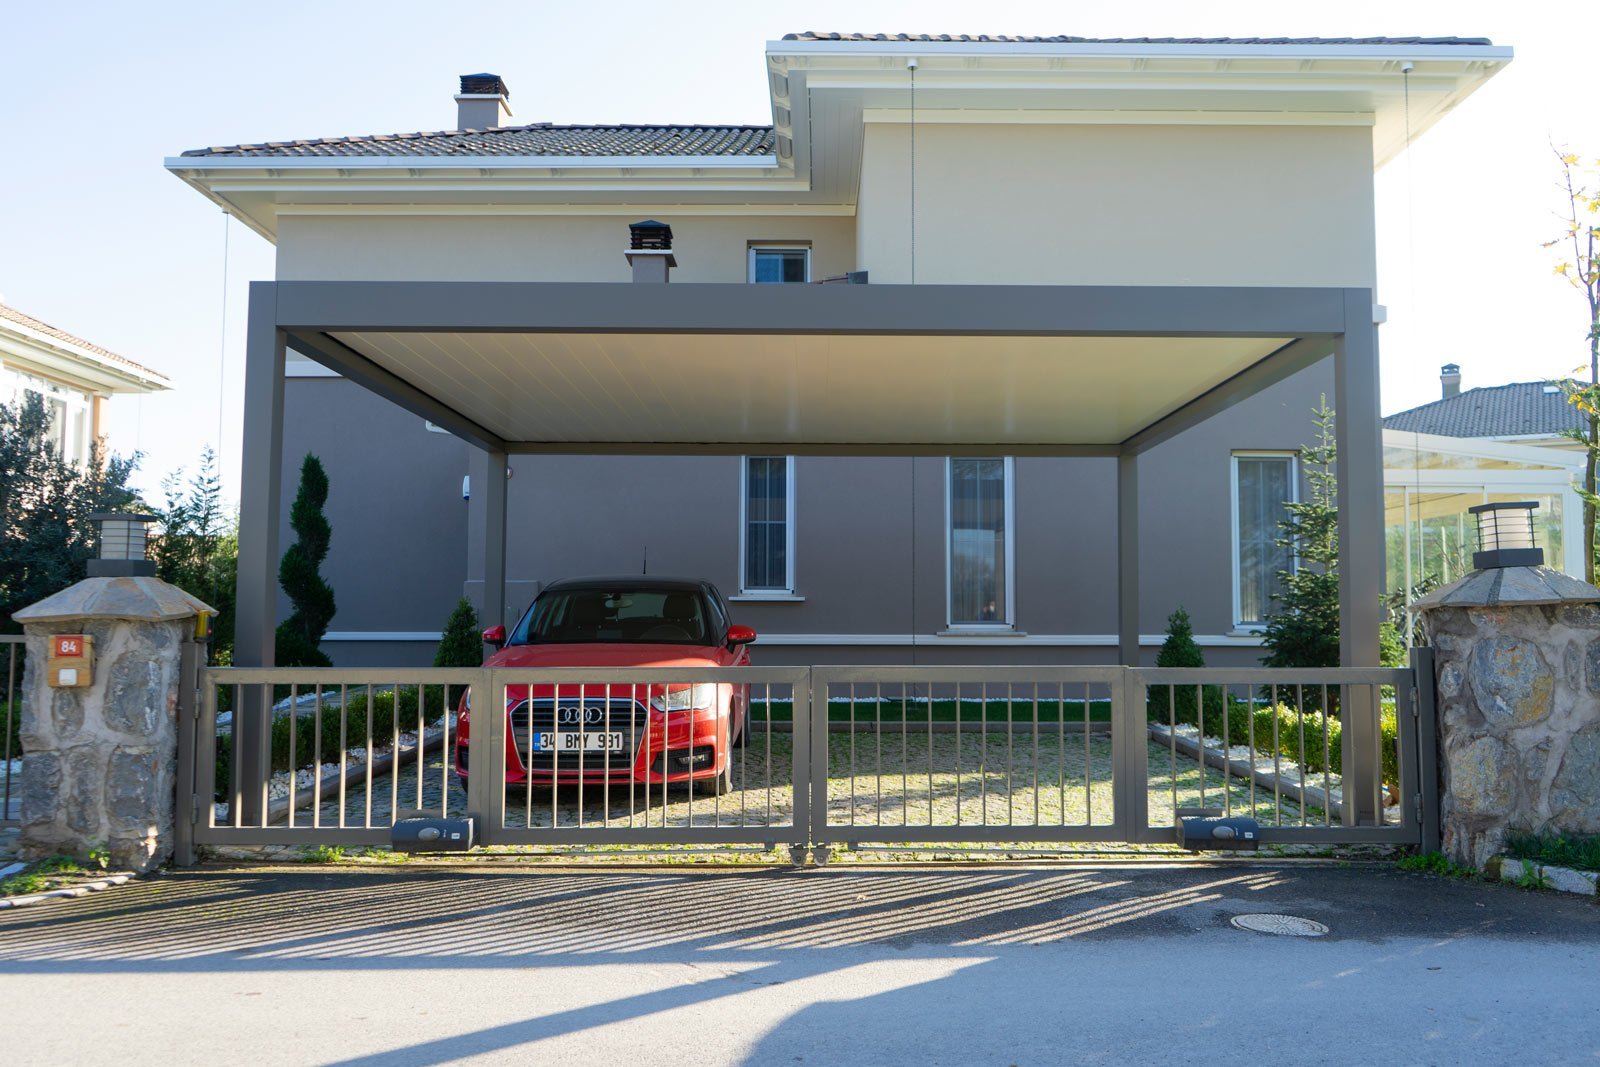 Louvered roof carport